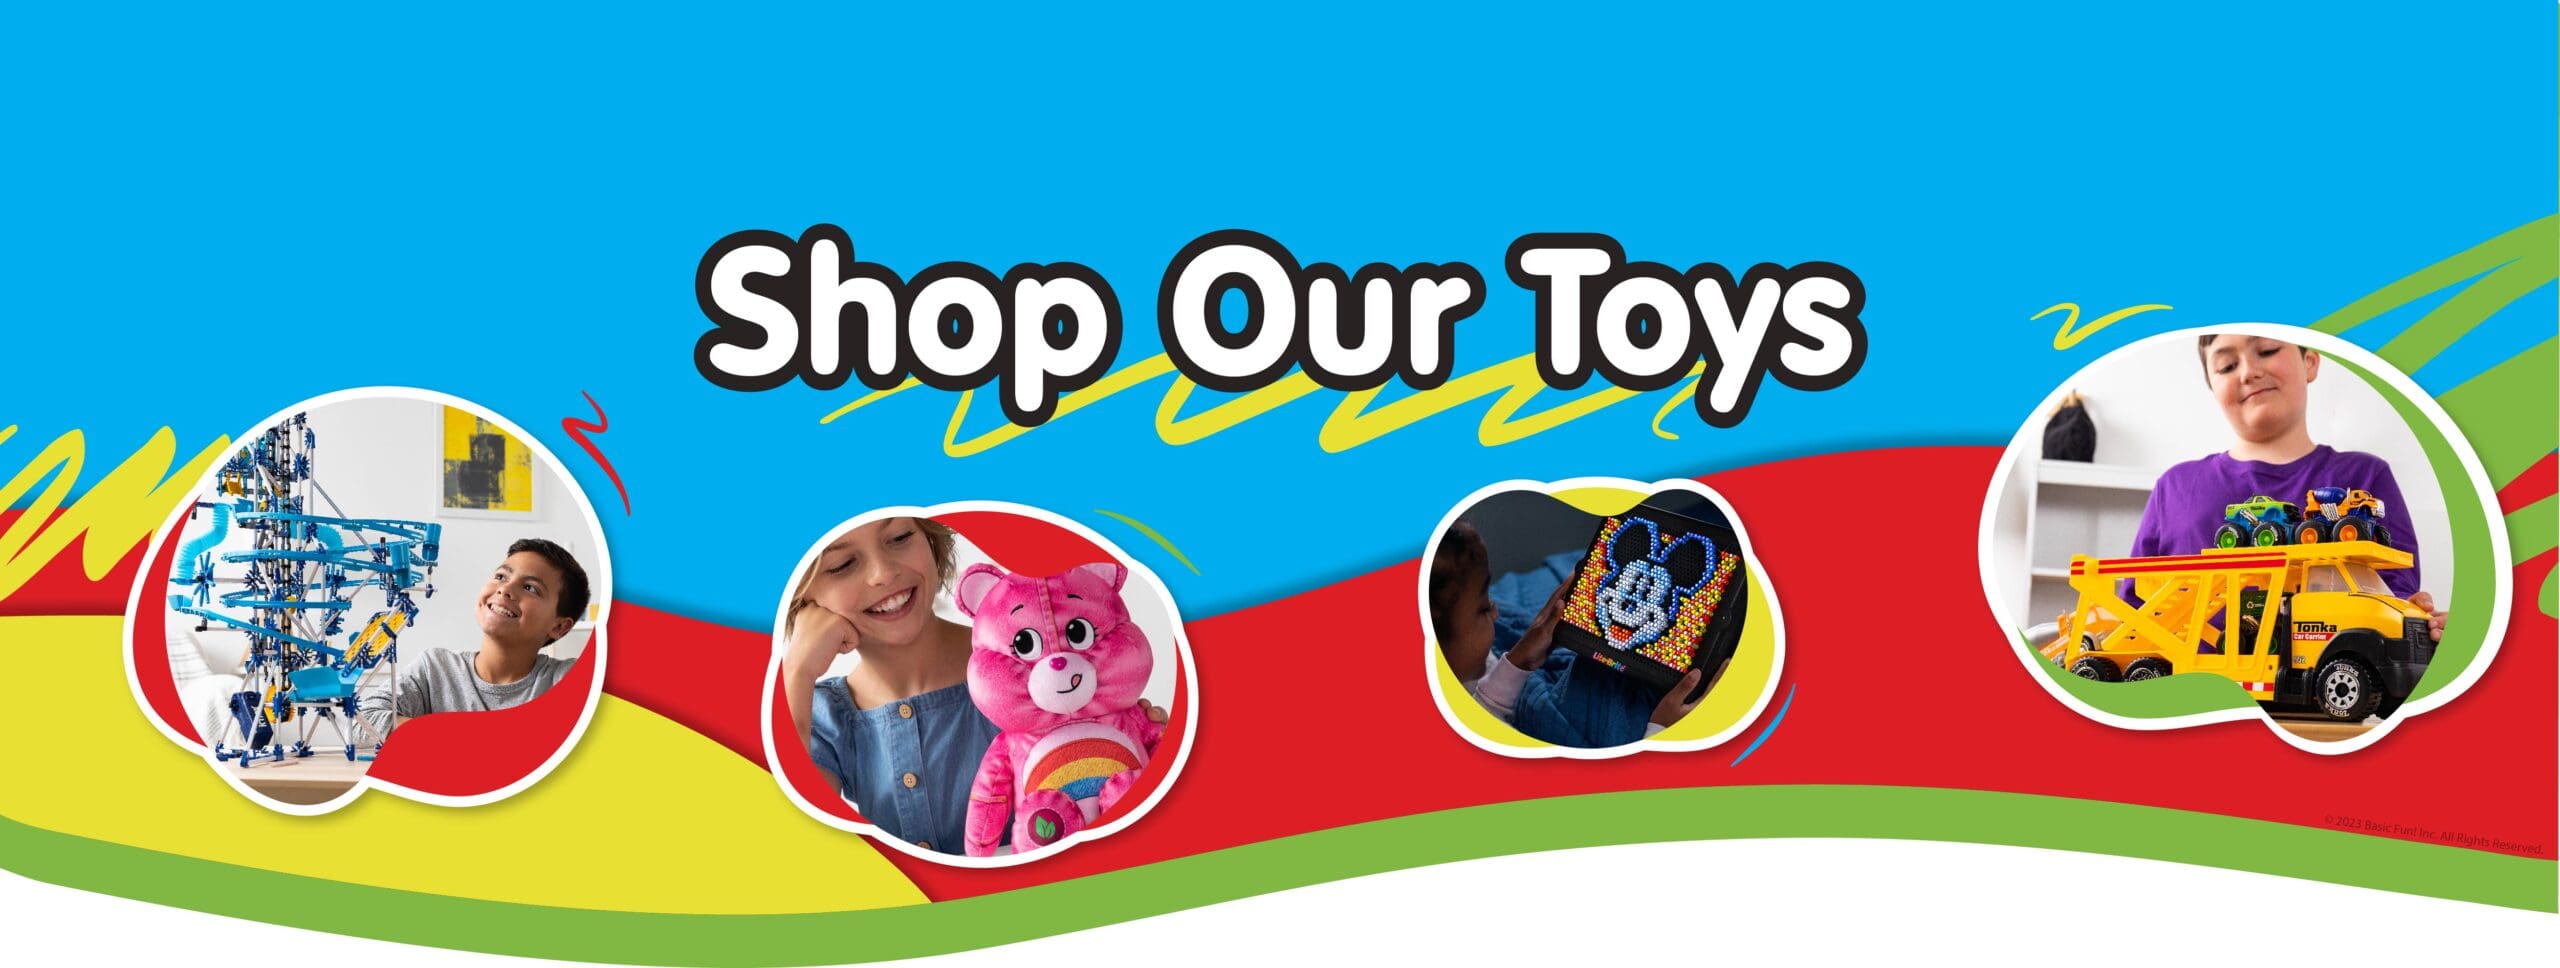 Shop Our Toys banner scaled